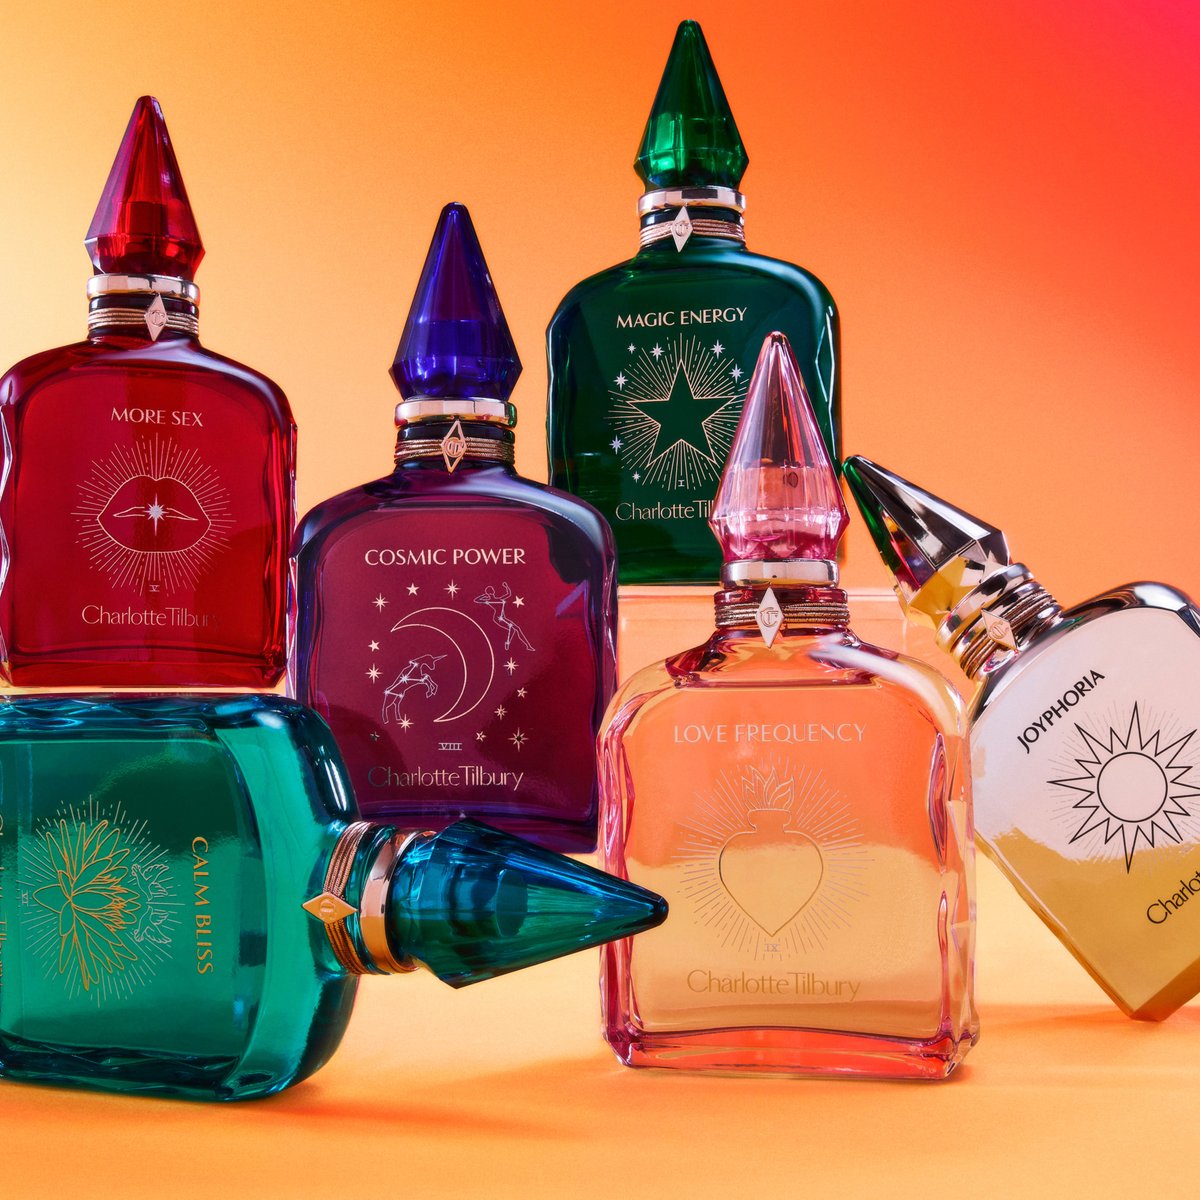 Introducing the new Charlotte Tilbury fragrances ✨ Love Frequency 💗 Joyphoria ☀️ More Sex ❤️‍🔥 Calm Bliss 🪷 Cosmic Power 🔮 Magic Energy 🪄 Discover the scents that make you feel 👉 house-of-fraser.visitlink.me/-gfEE1 #CharlotteTilbury #CharlottesCollectionofEmotions #HouseofFraser